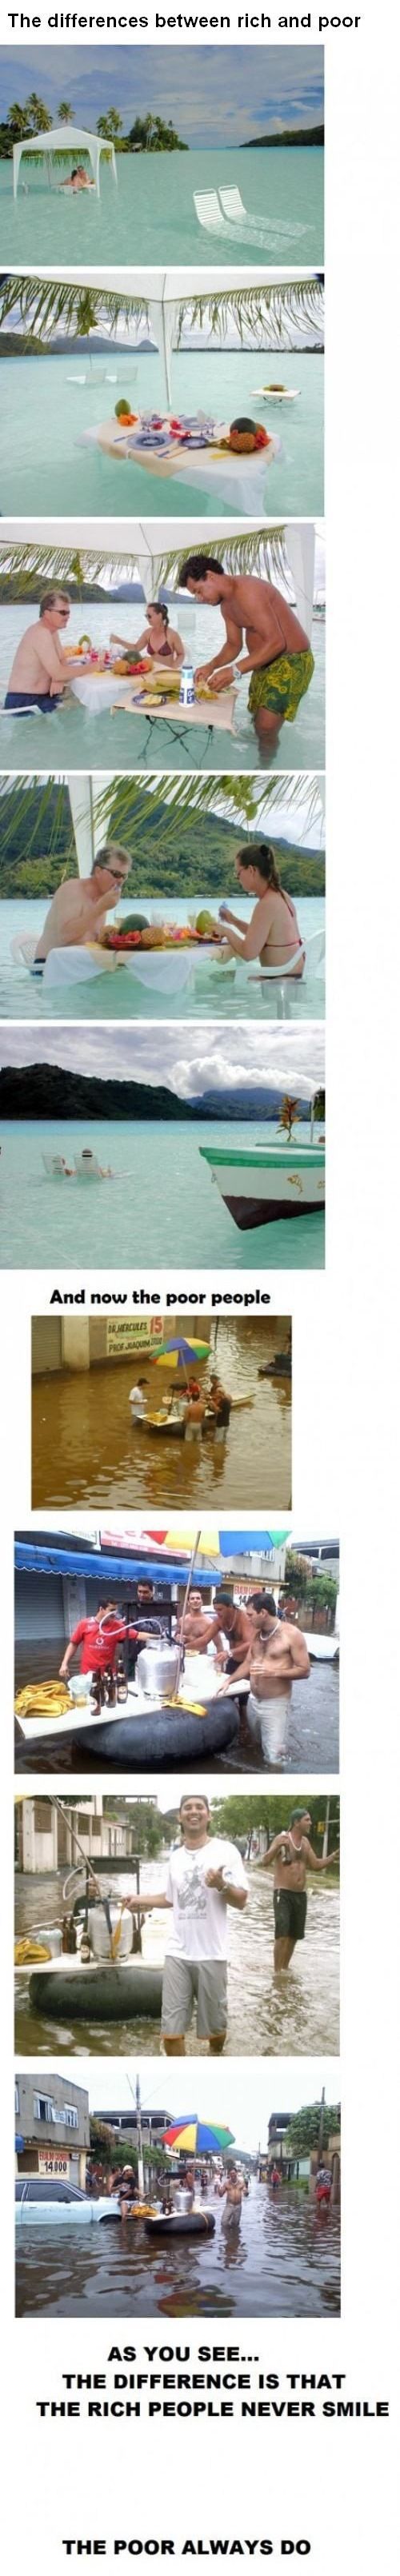 One Big Difference Between the Rich and Poor